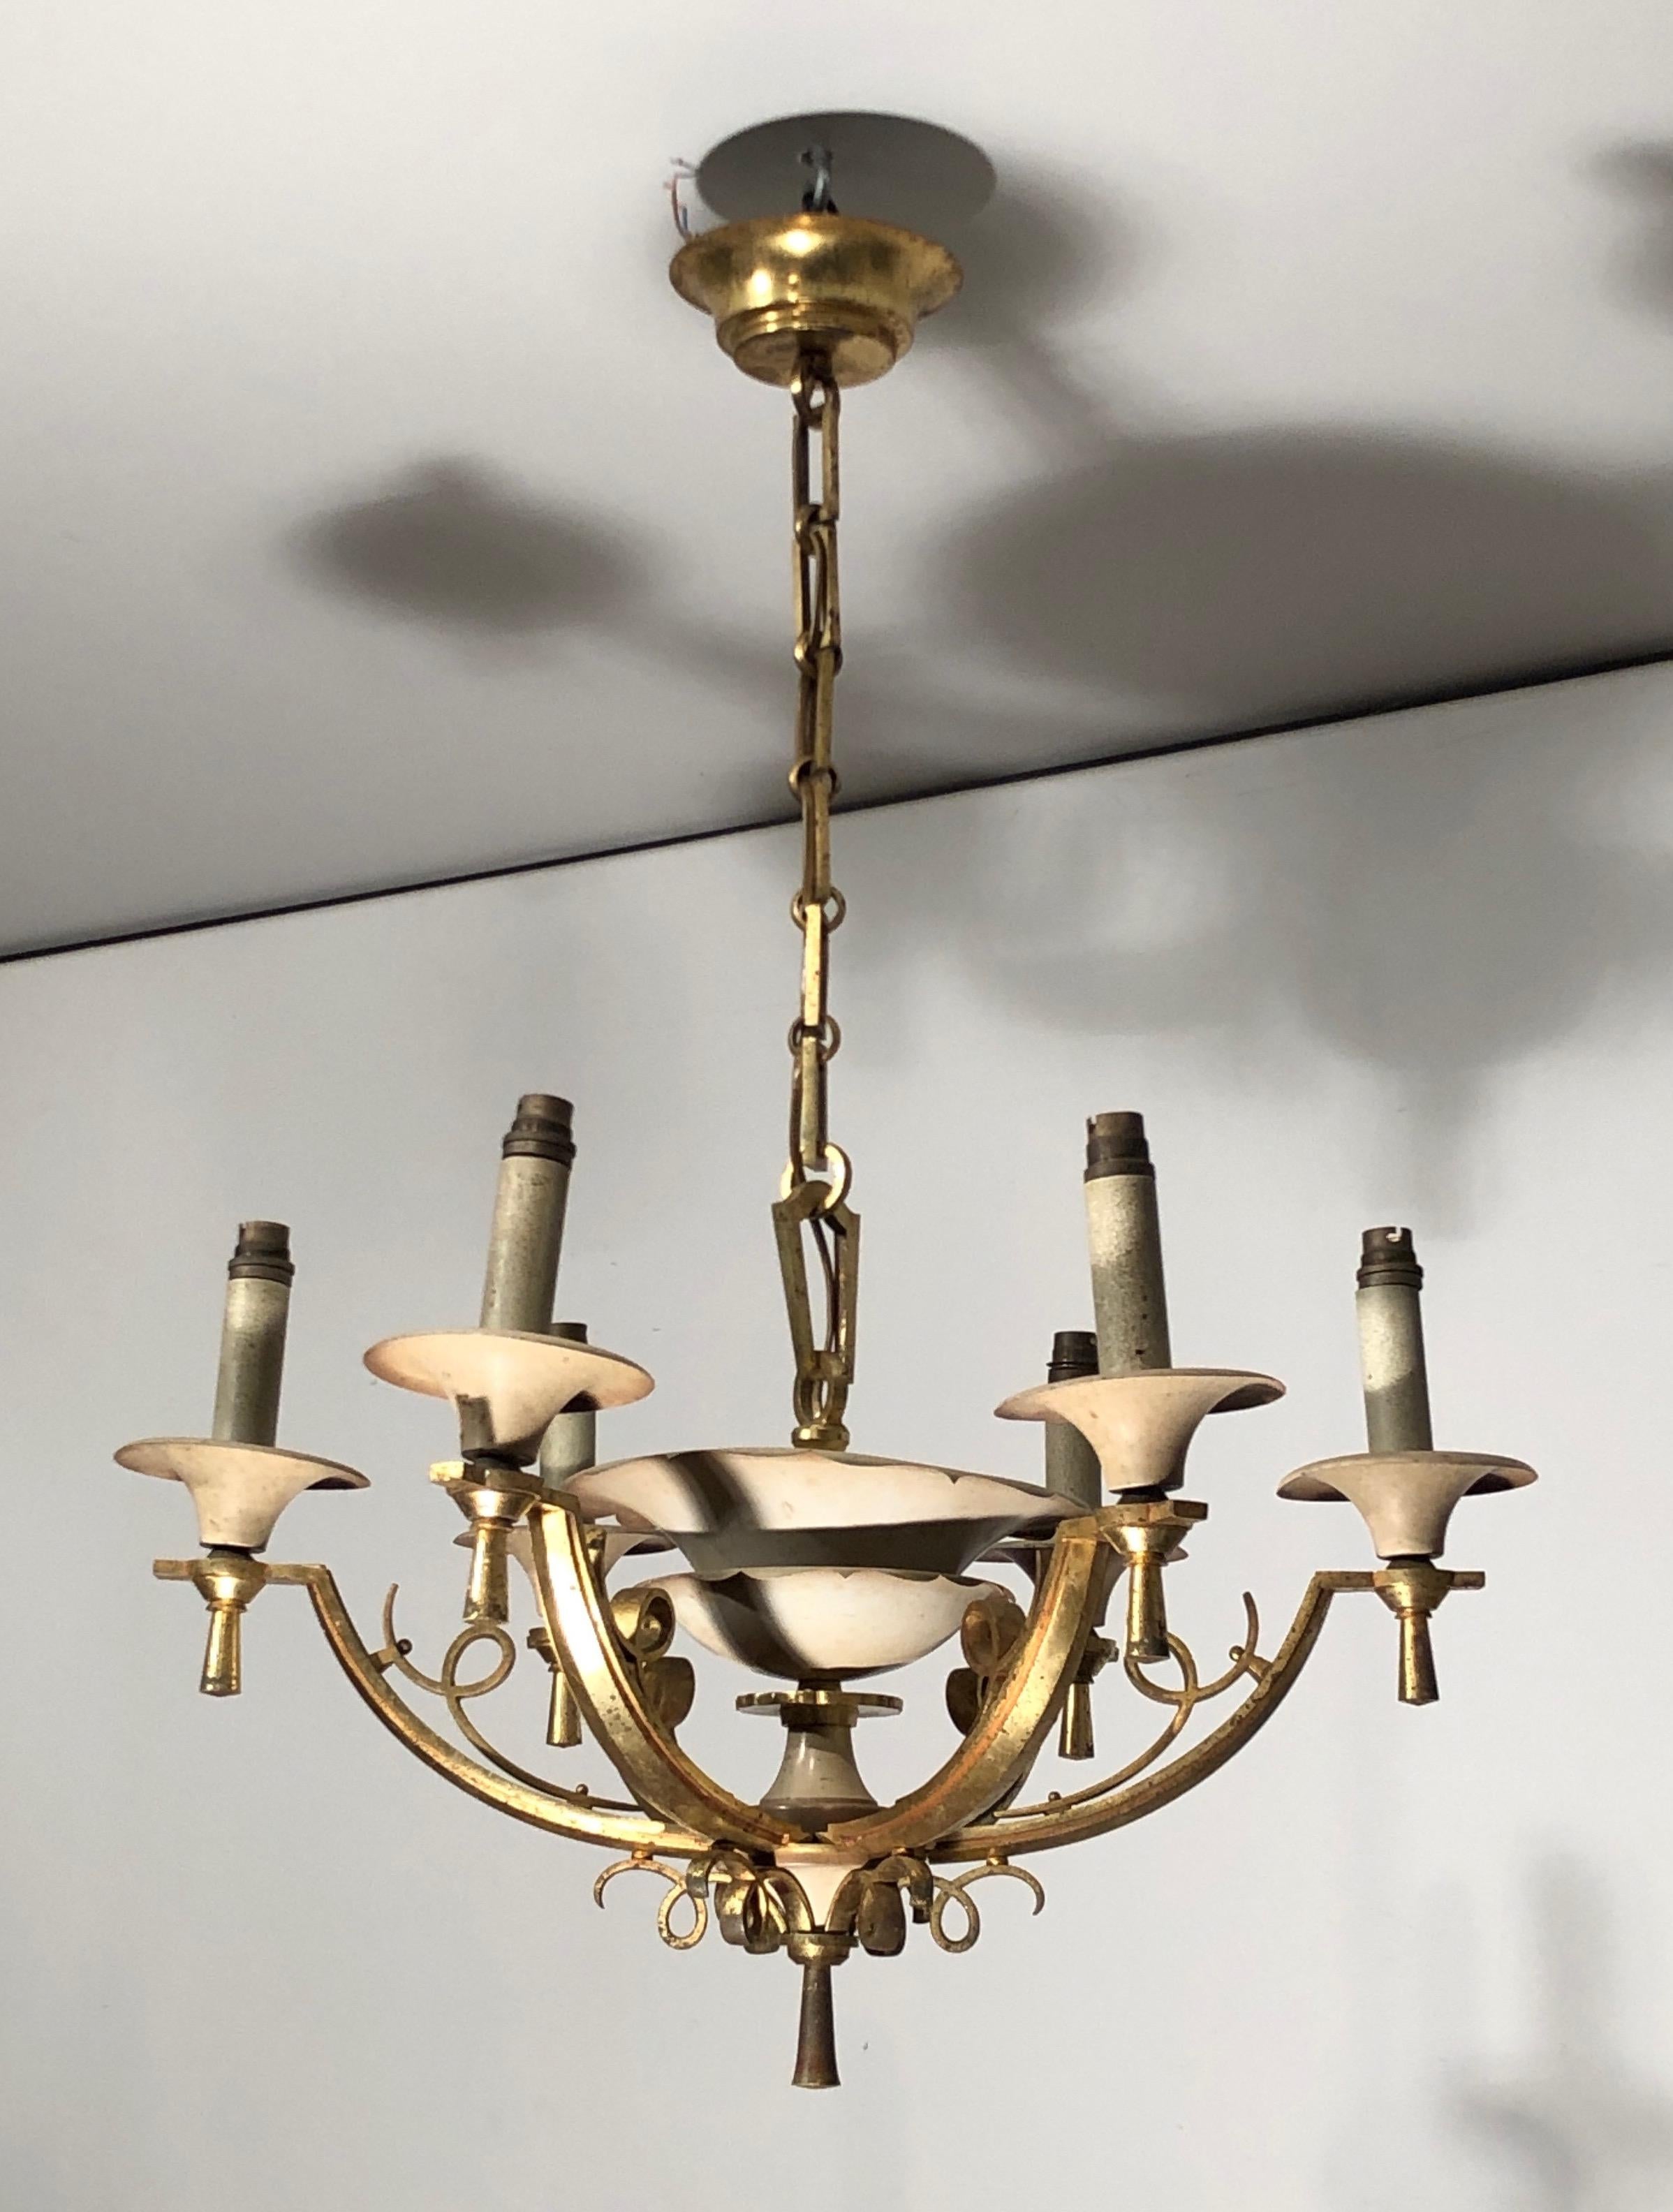 This very nice 6 lights chandelier. is made of acquered metal and brass. This is a French work. Circa 1940
